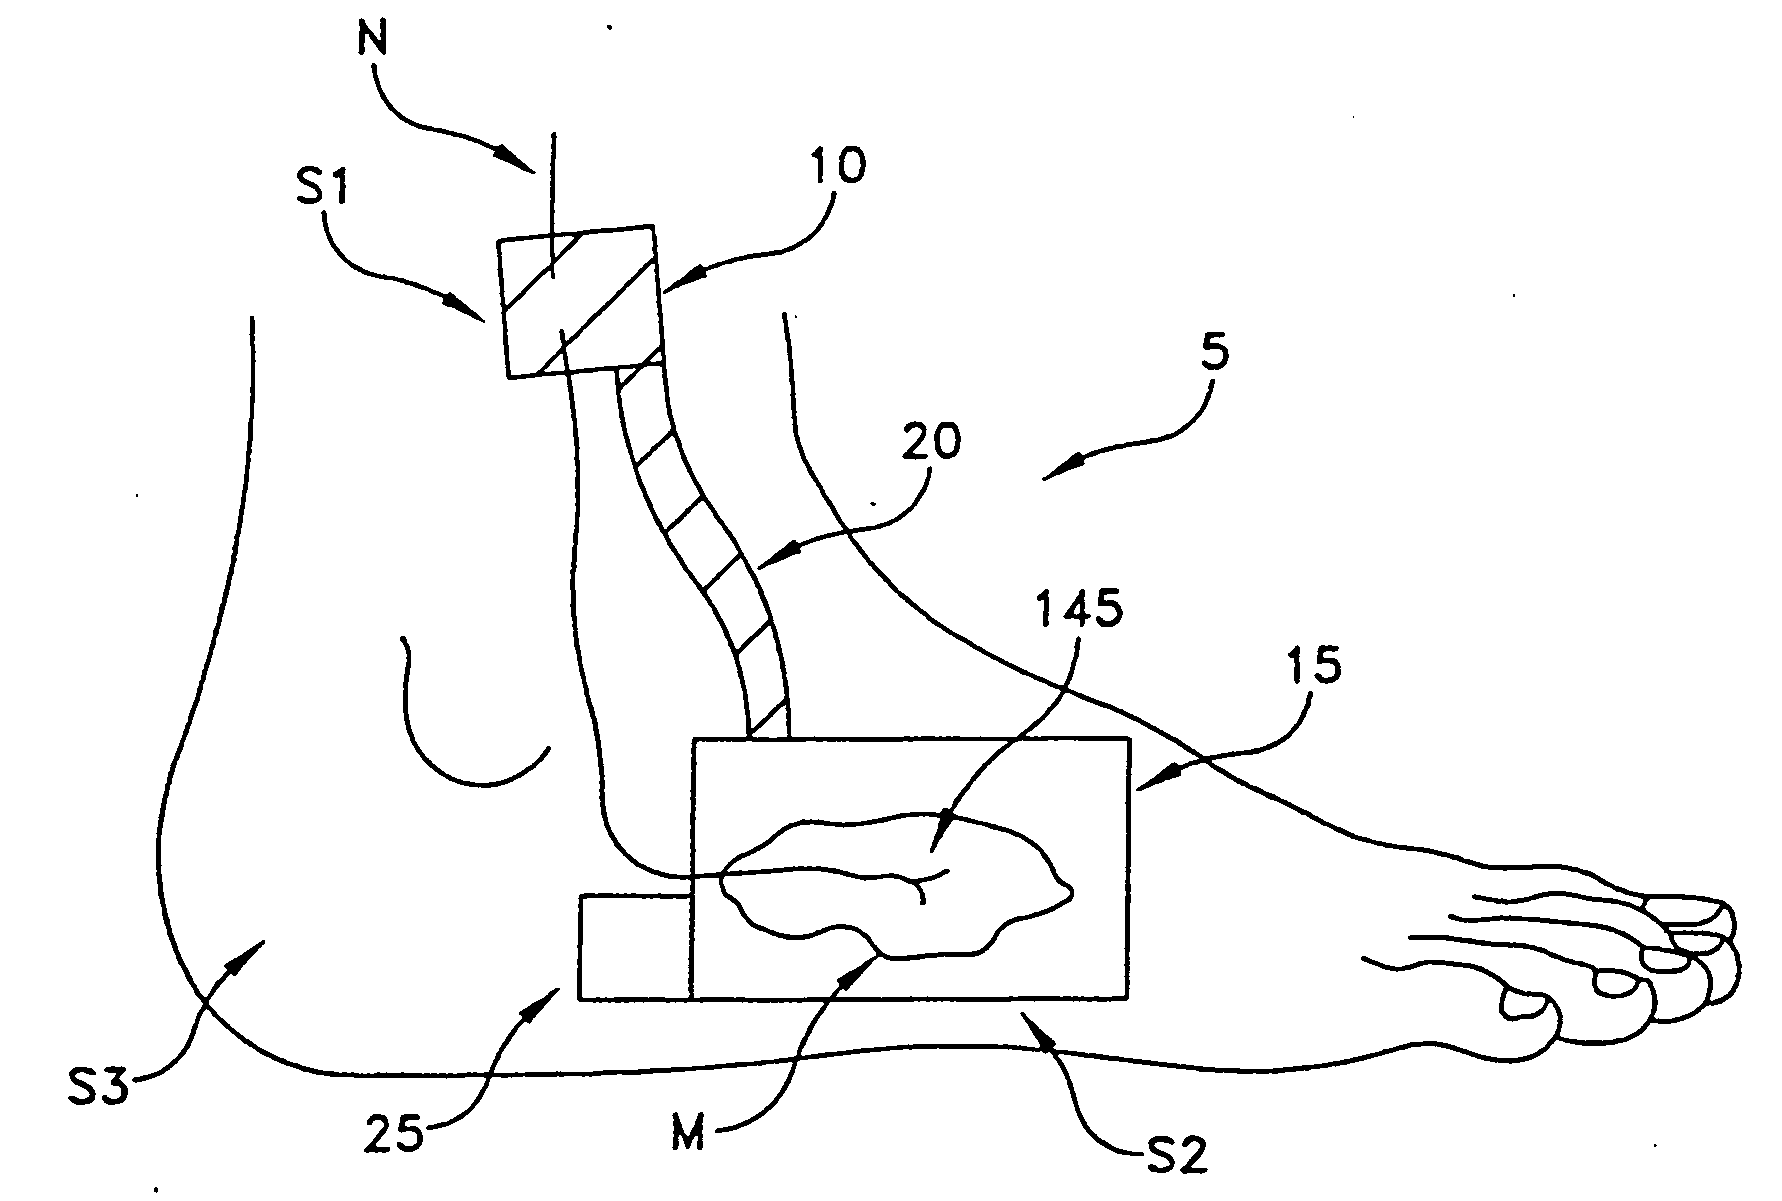 Apparatus and method for performing nerve conduction studies with localization of evoked responses